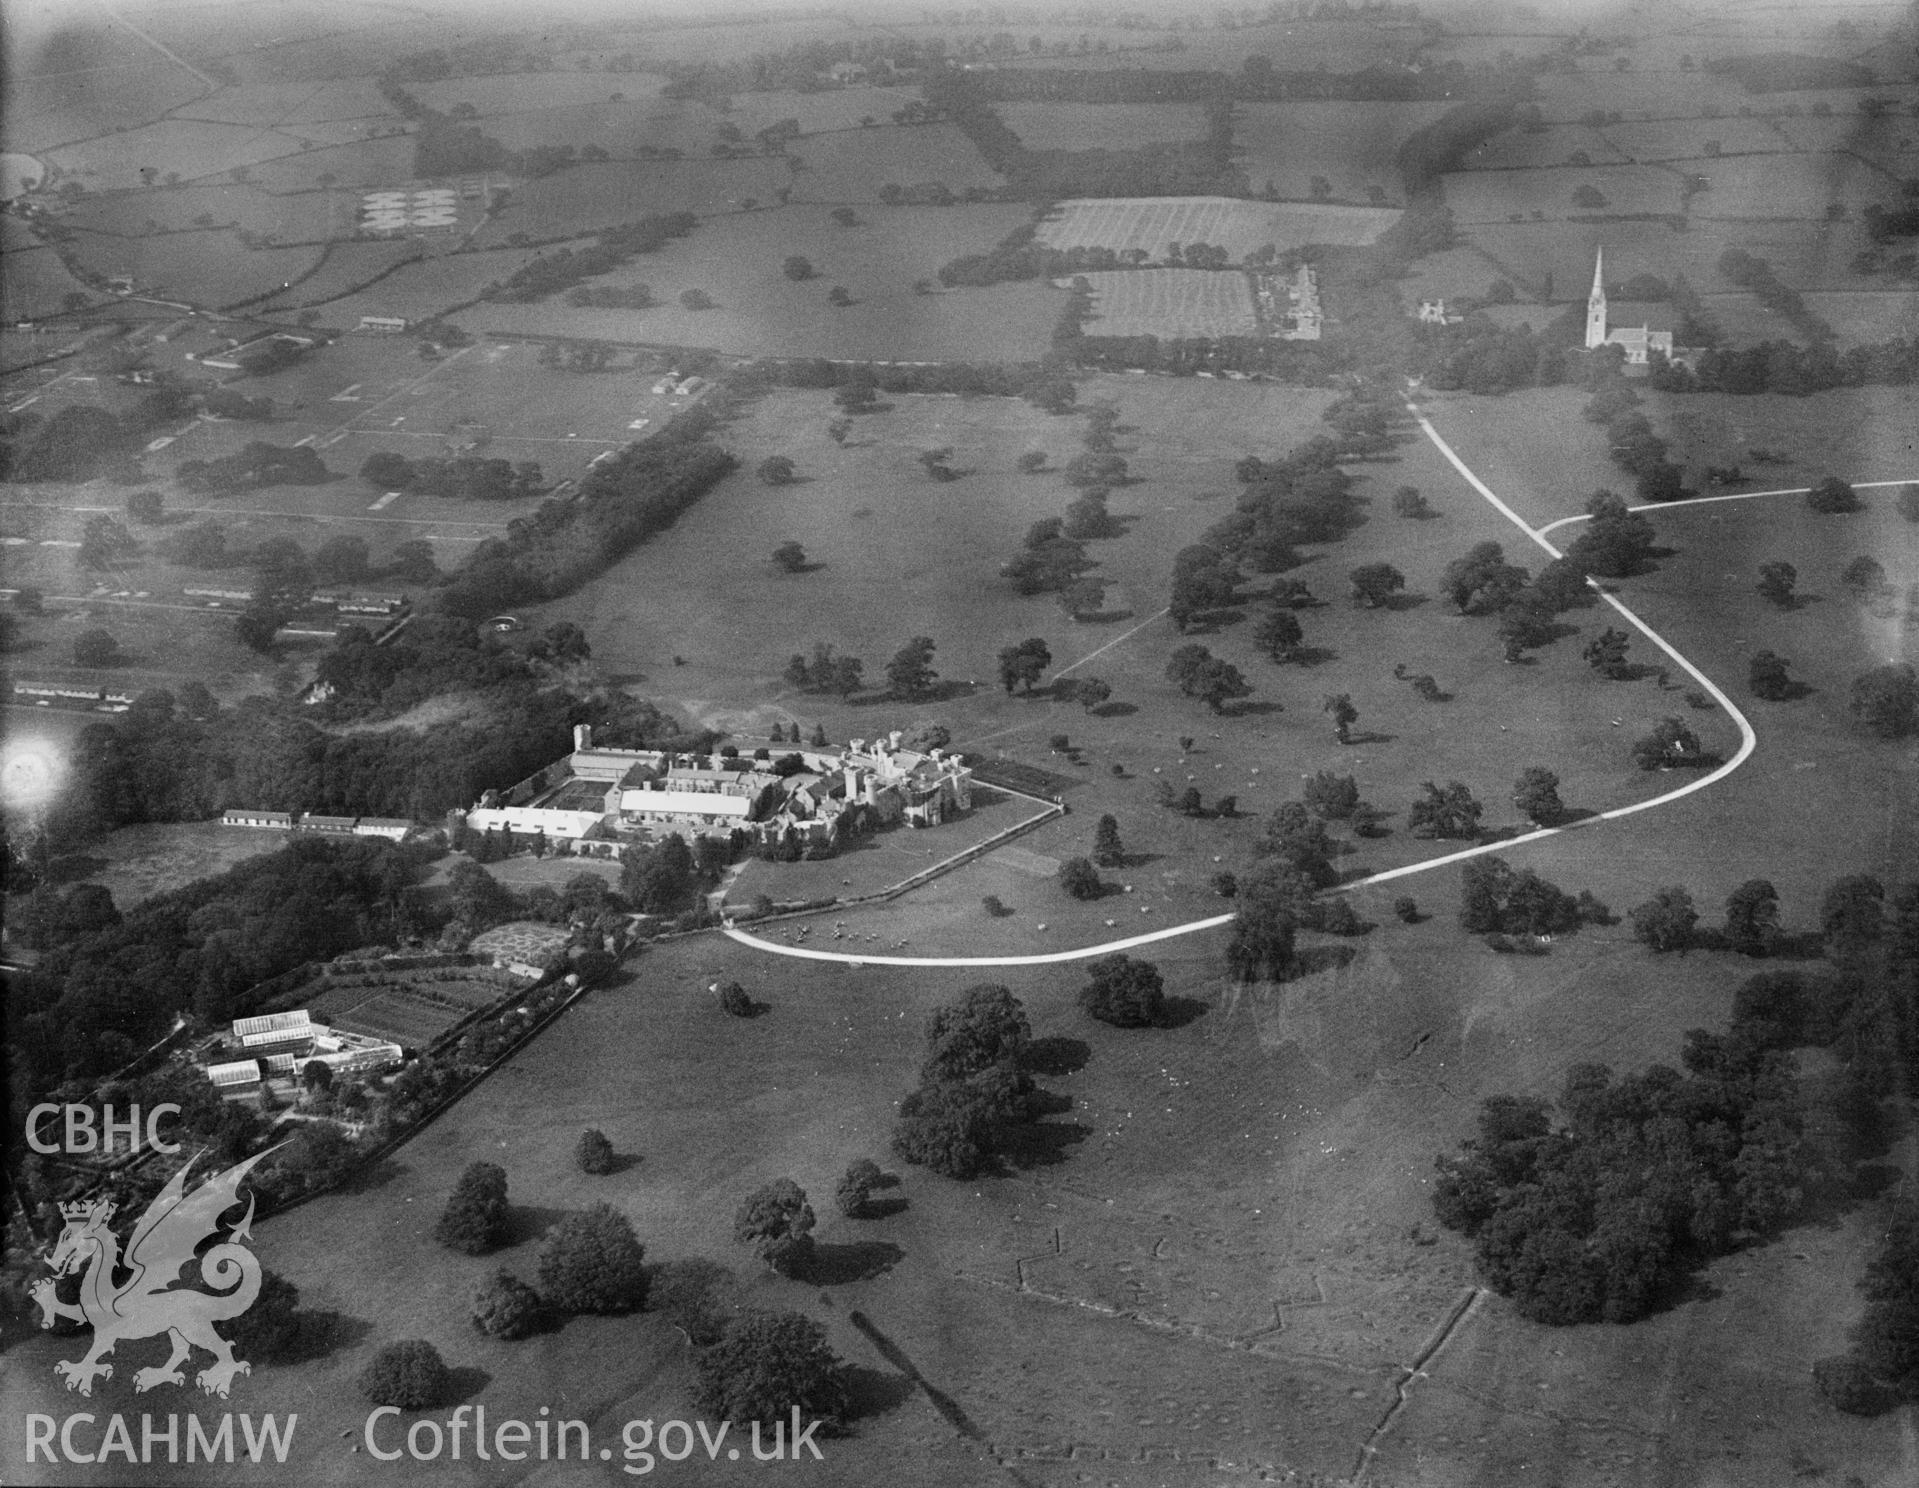 Bodelwyddan Castle showing First World War practice trenches and bomb craters in the foreground, oblique aerial view. 5?x4? black and white glass plate negative.